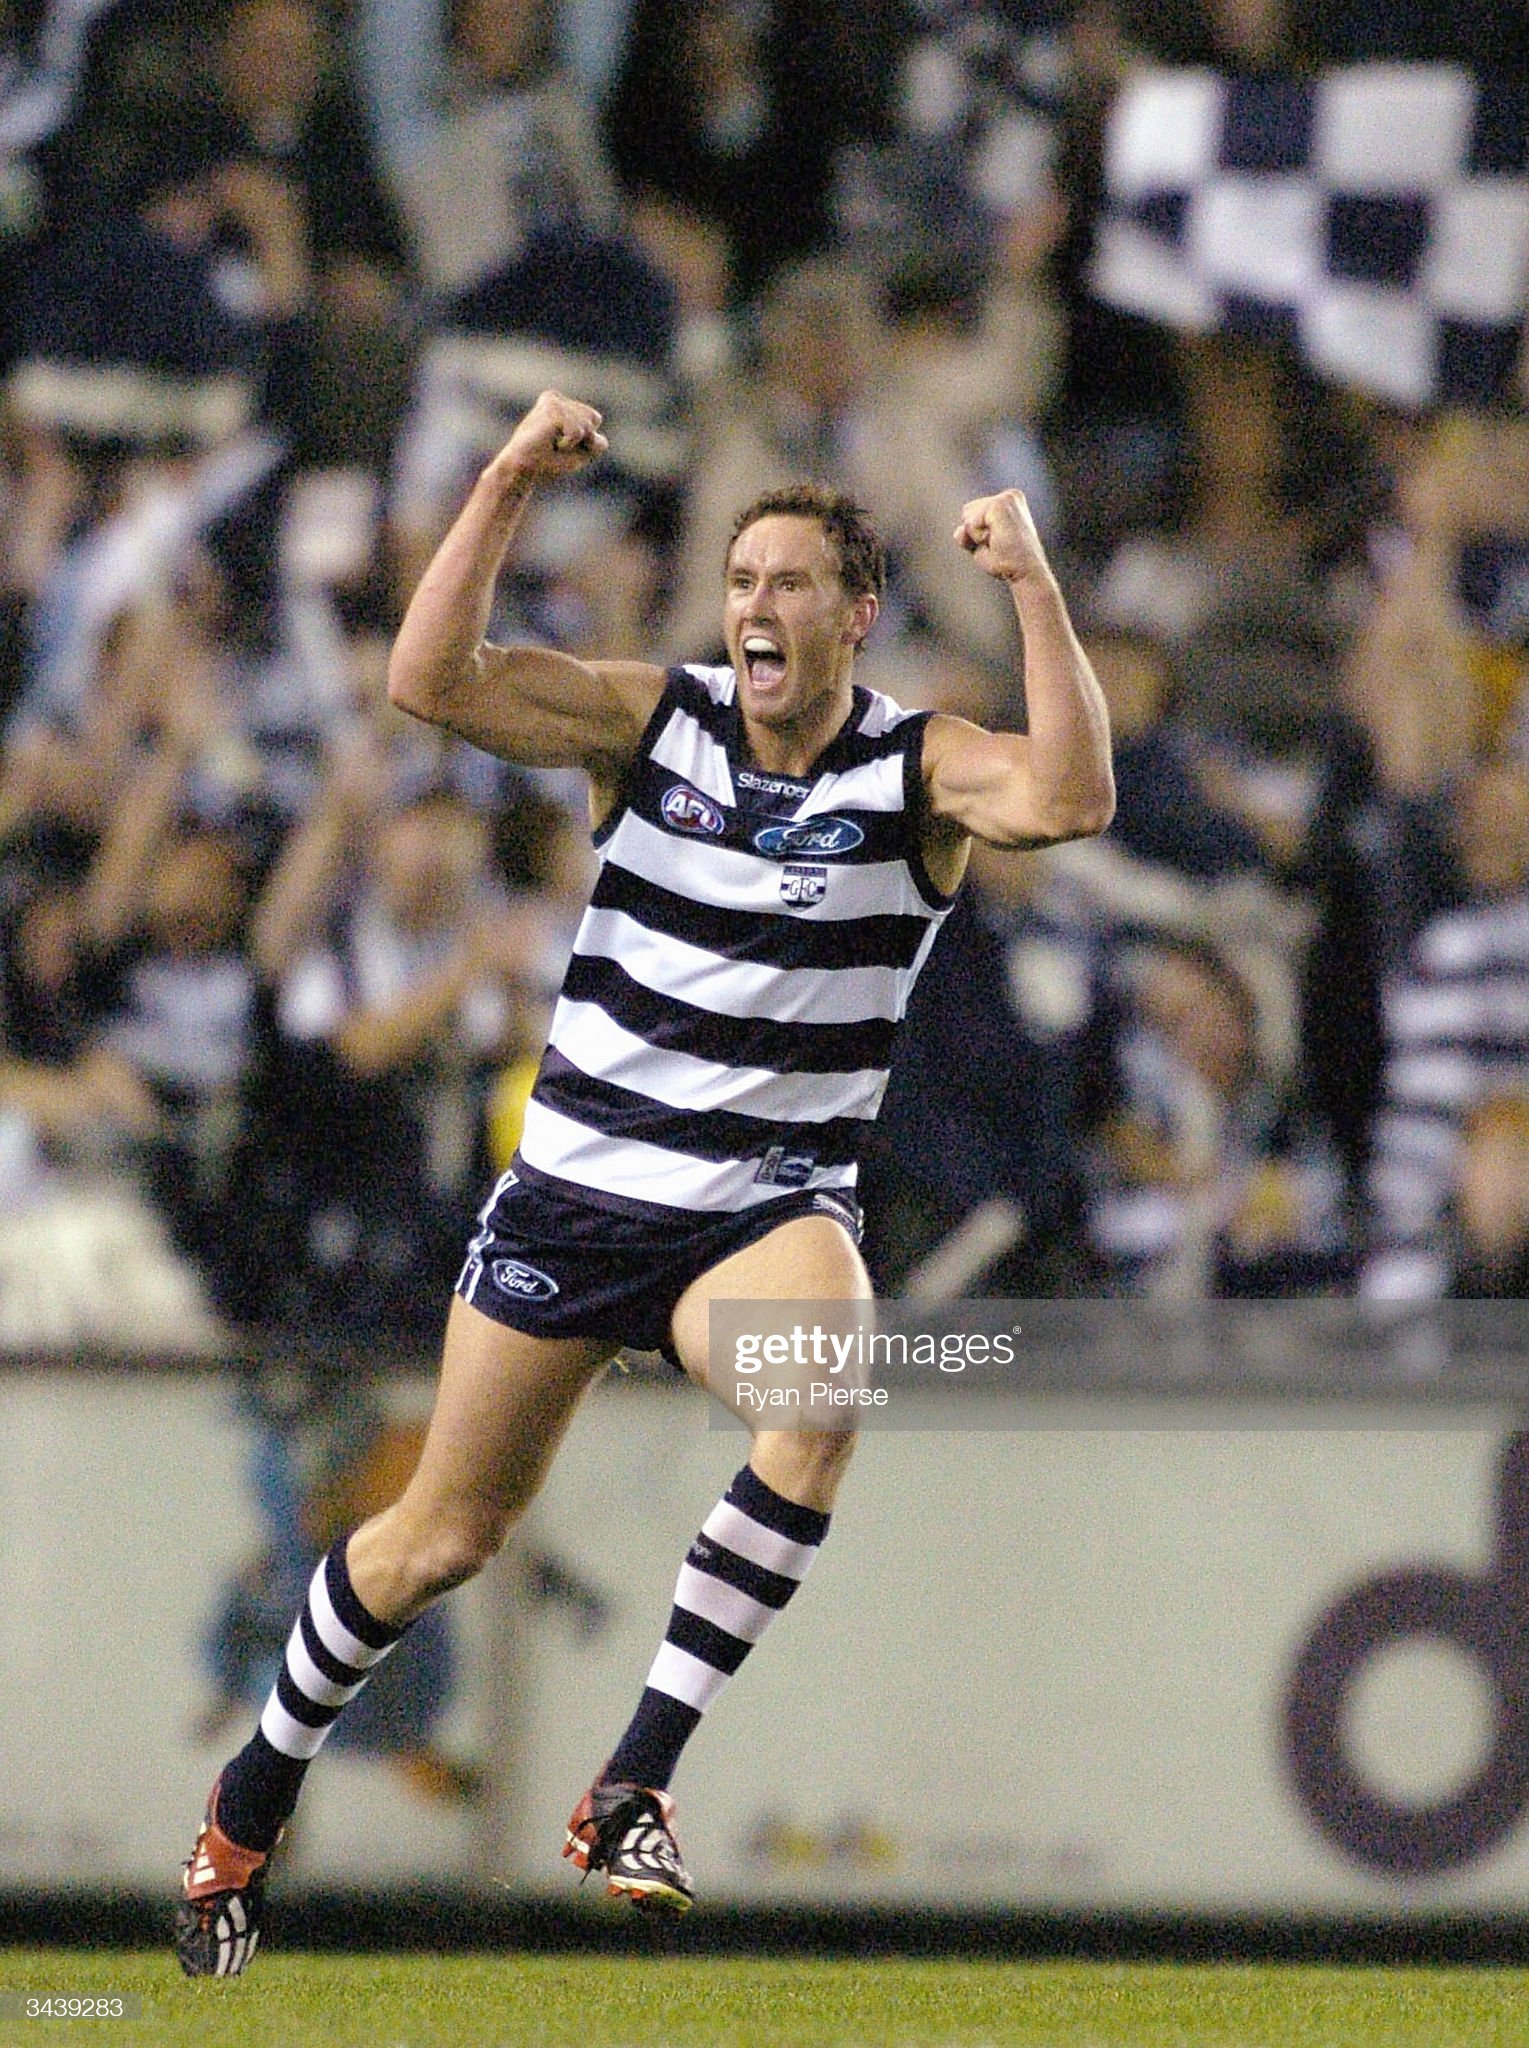 ben-graham-for-the-cats-celebrates-a-goal-during-the-round-four-afl-picture-id3439283